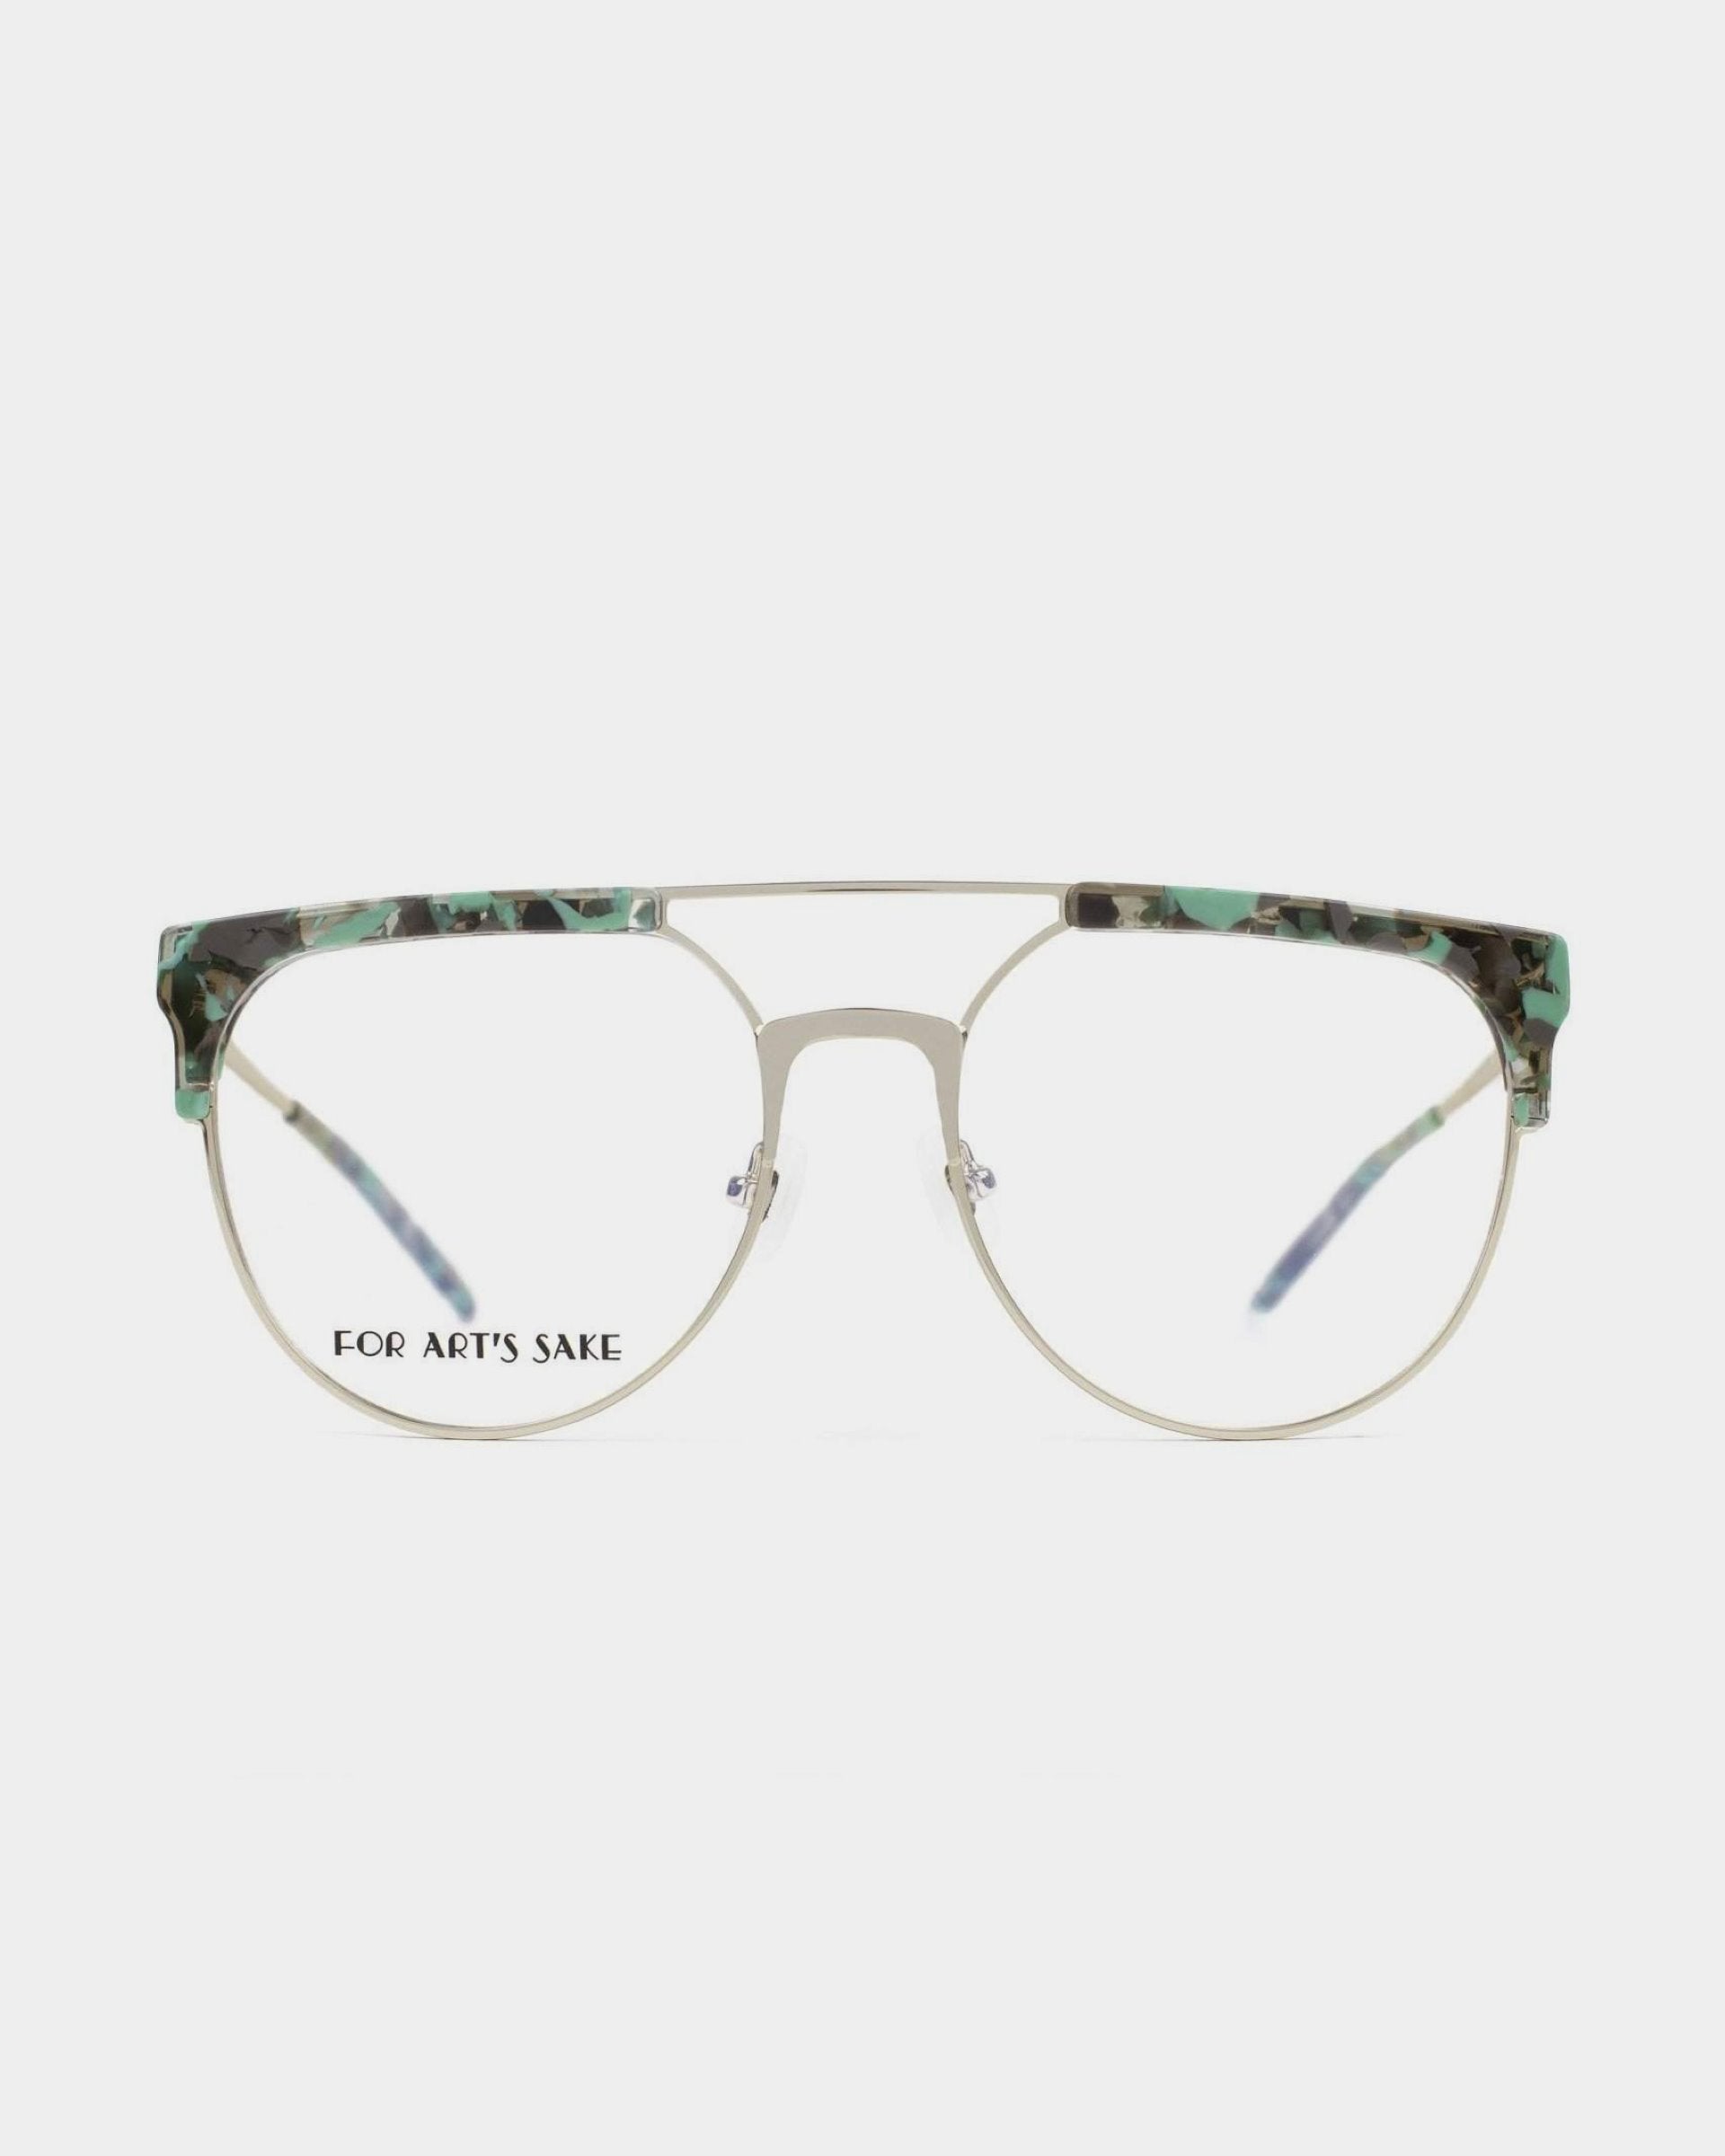 A pair of Frosty prescription glasses from For Art's Sake® with a green tortoiseshell pattern on the brow bar and temple tips. The frame boasts a double bridge design and clear lenses with UV protection. The text "FOR ART'S SAKE" is visible on the left lens against a plain white background.